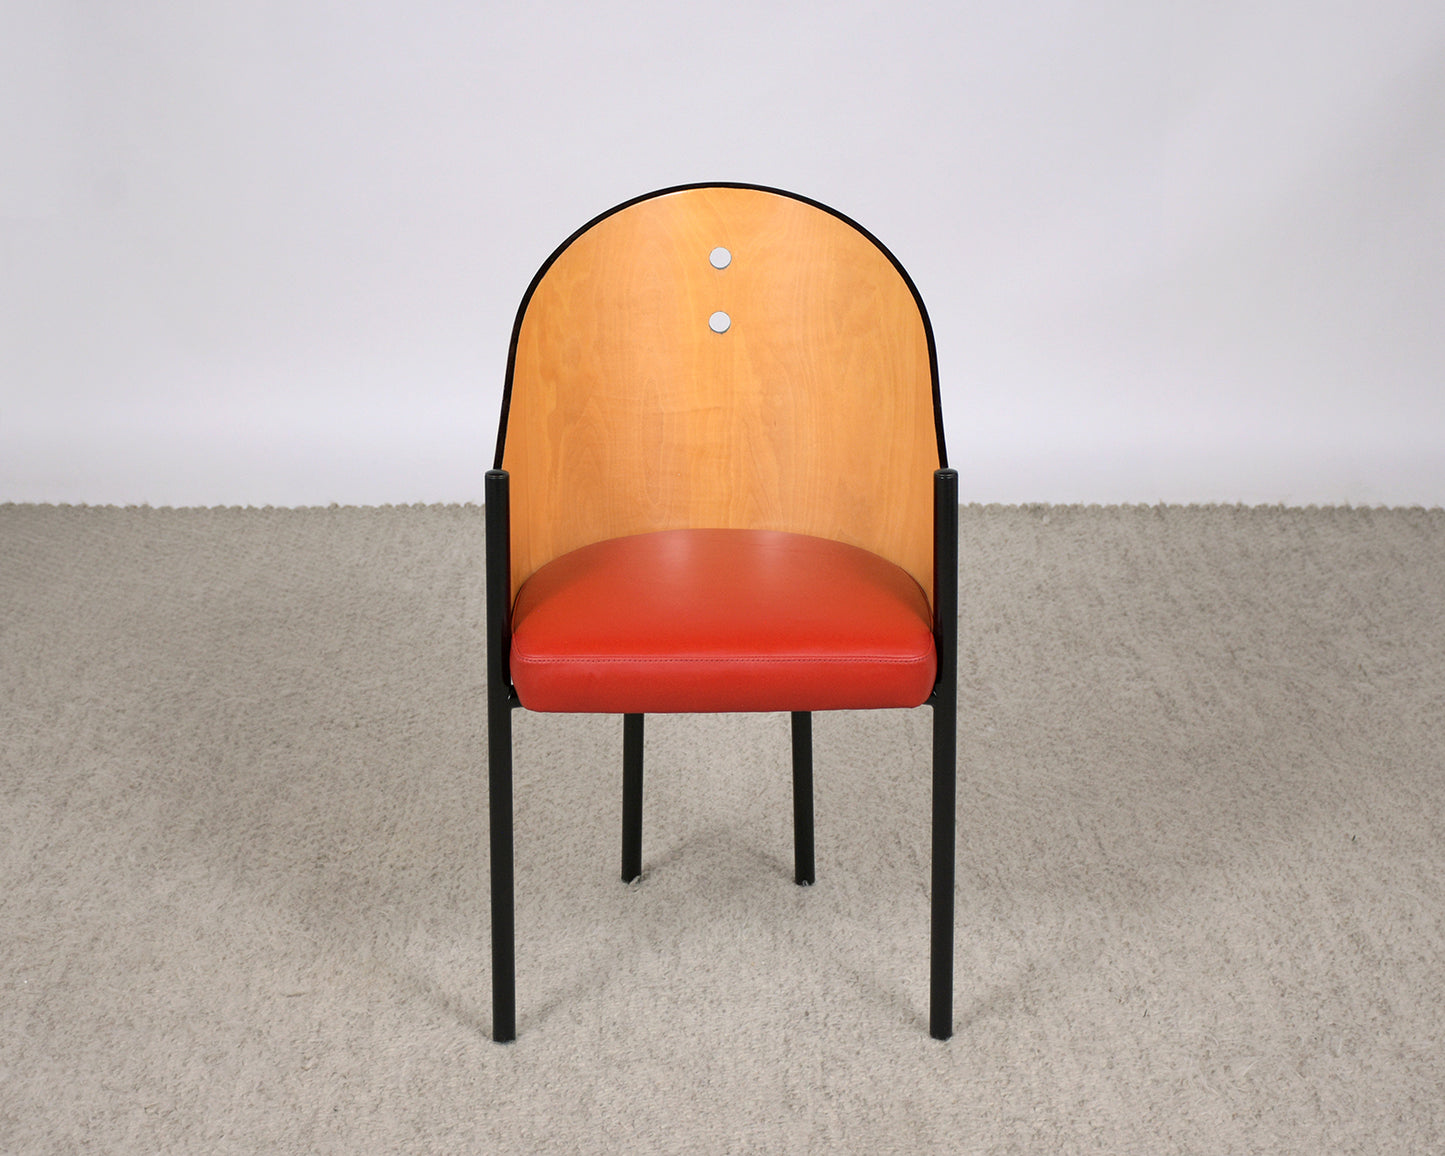 Set of 8 Vintage Mid-Century Dining Chairs: Timeless Elegance in Red Leather